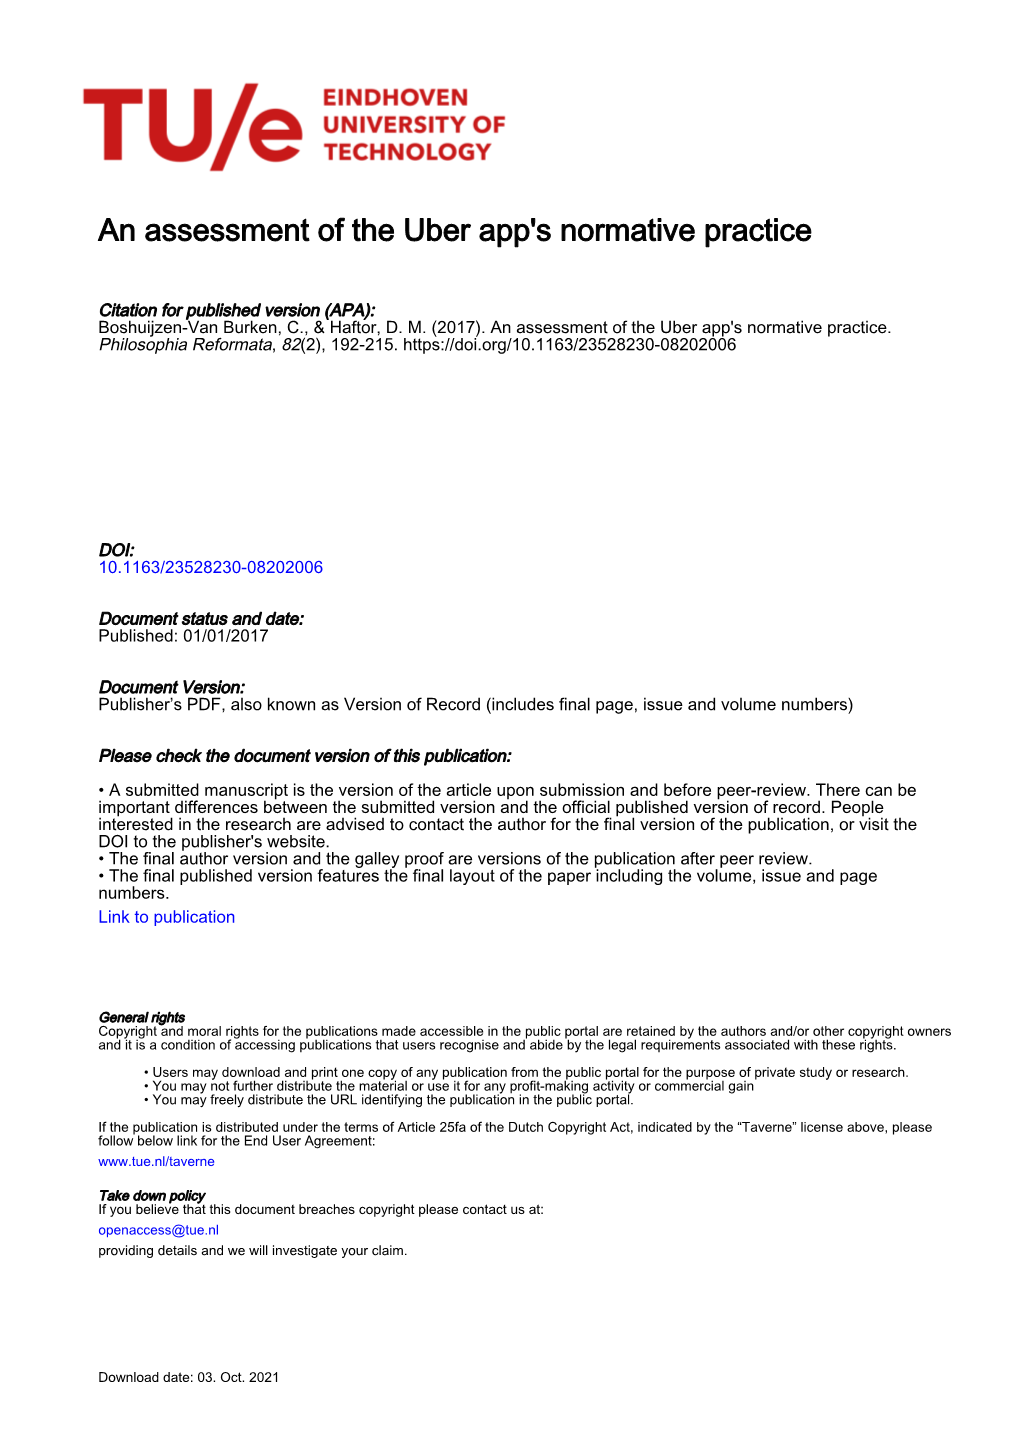 An Assessment of the Uber App's Normative Practice